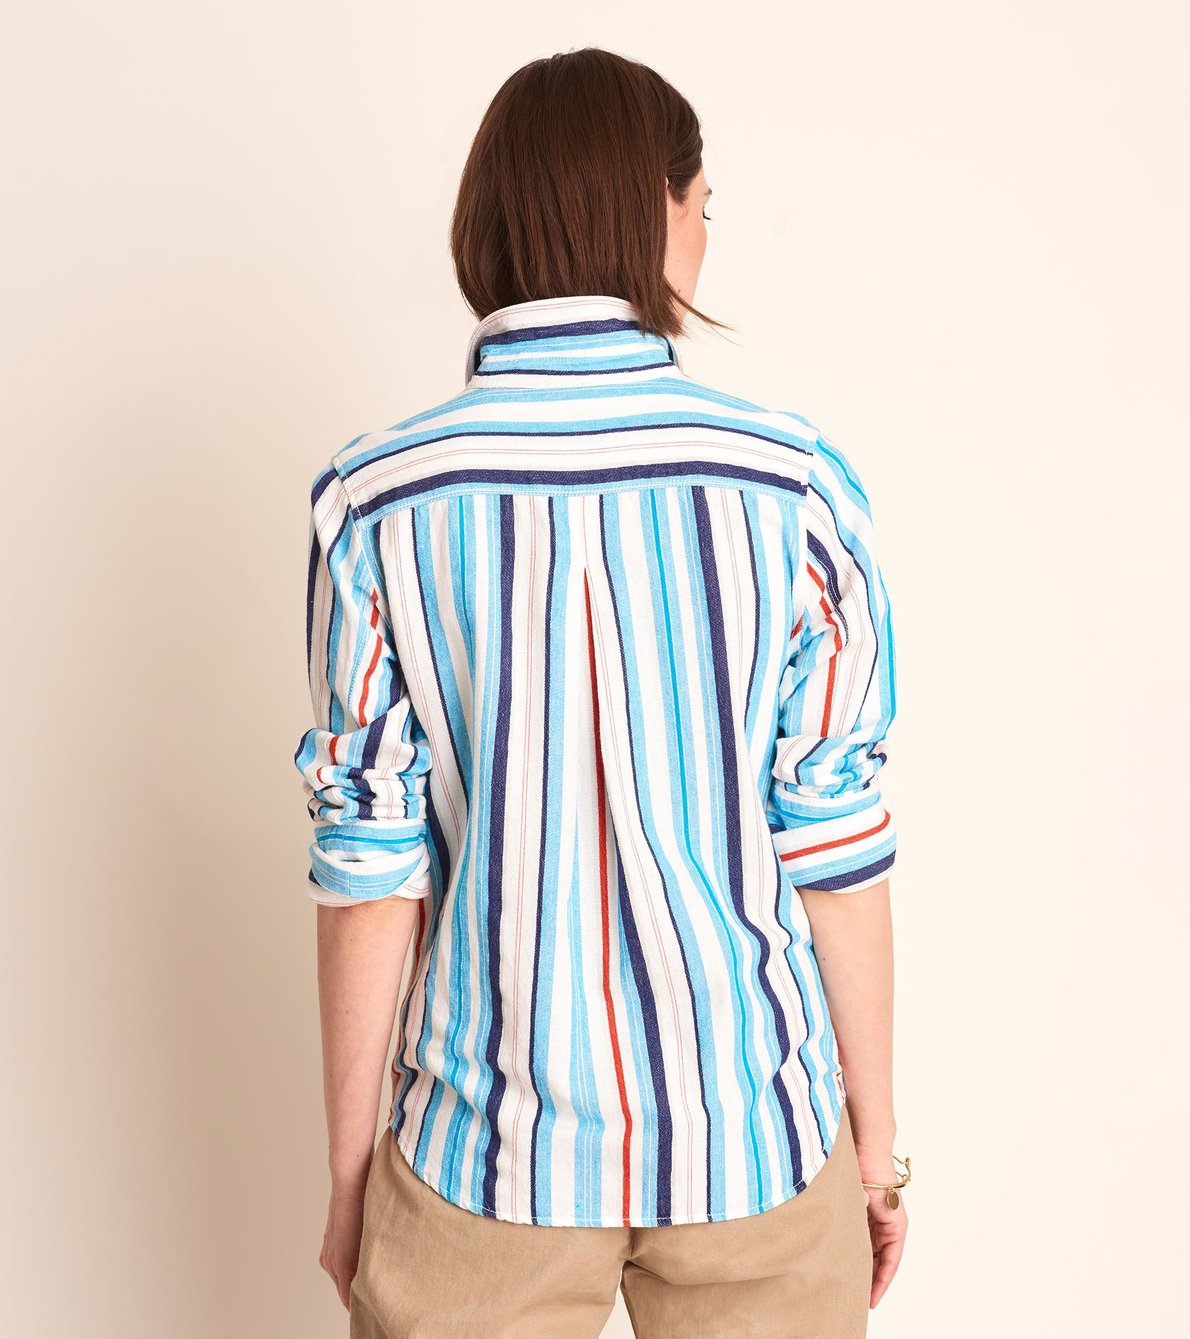 View larger image of Cindy Shirt - Preppy Stripes